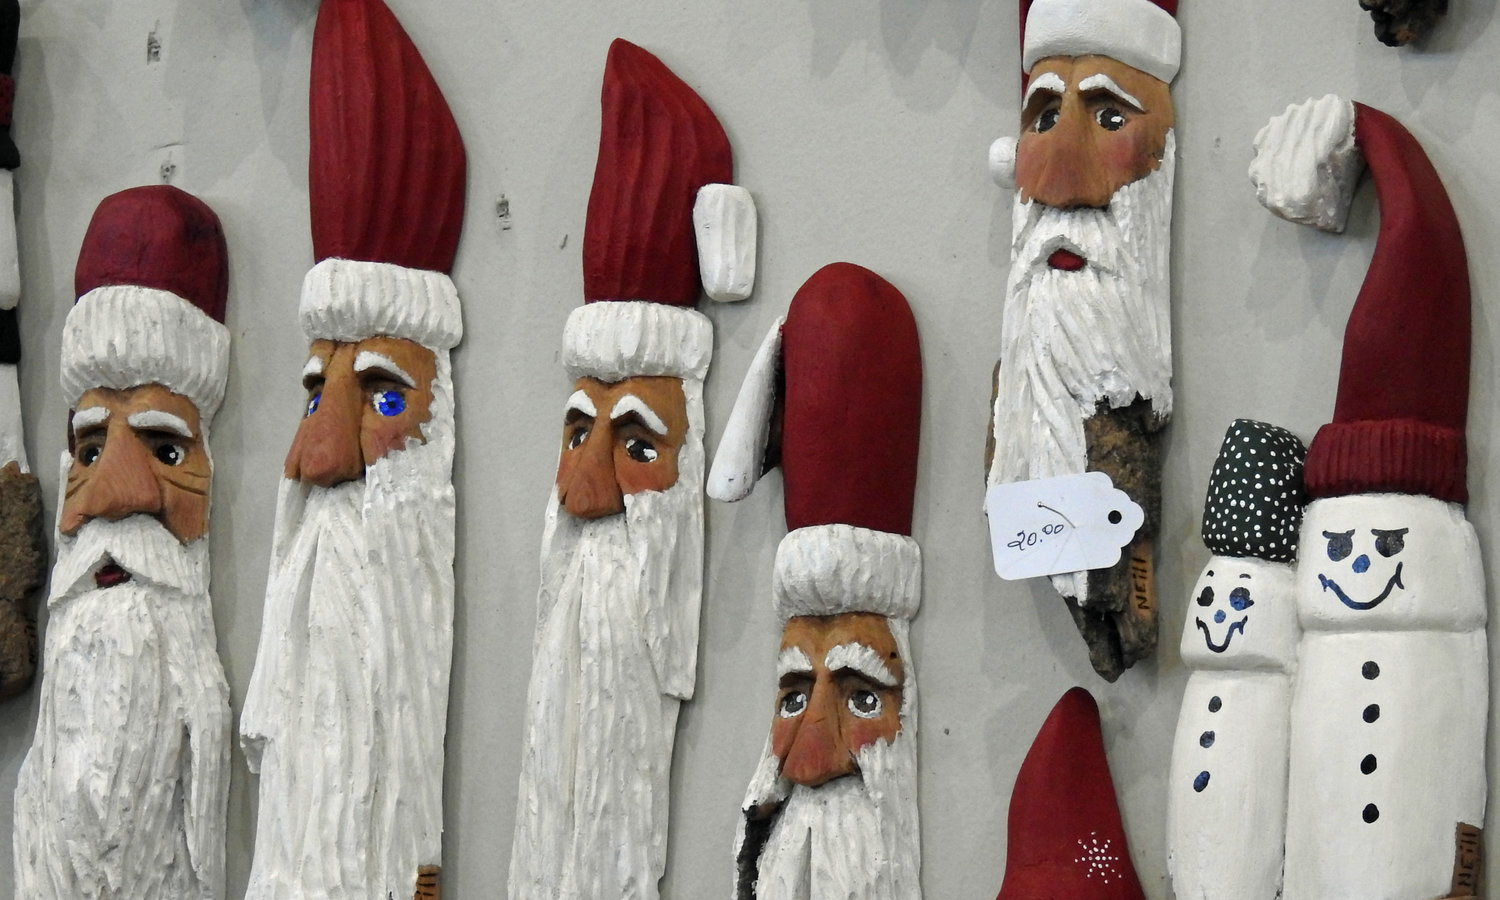 Cottonwood carvings by Charlie Neill hang on display at Holiday Arts and Crafts Show.